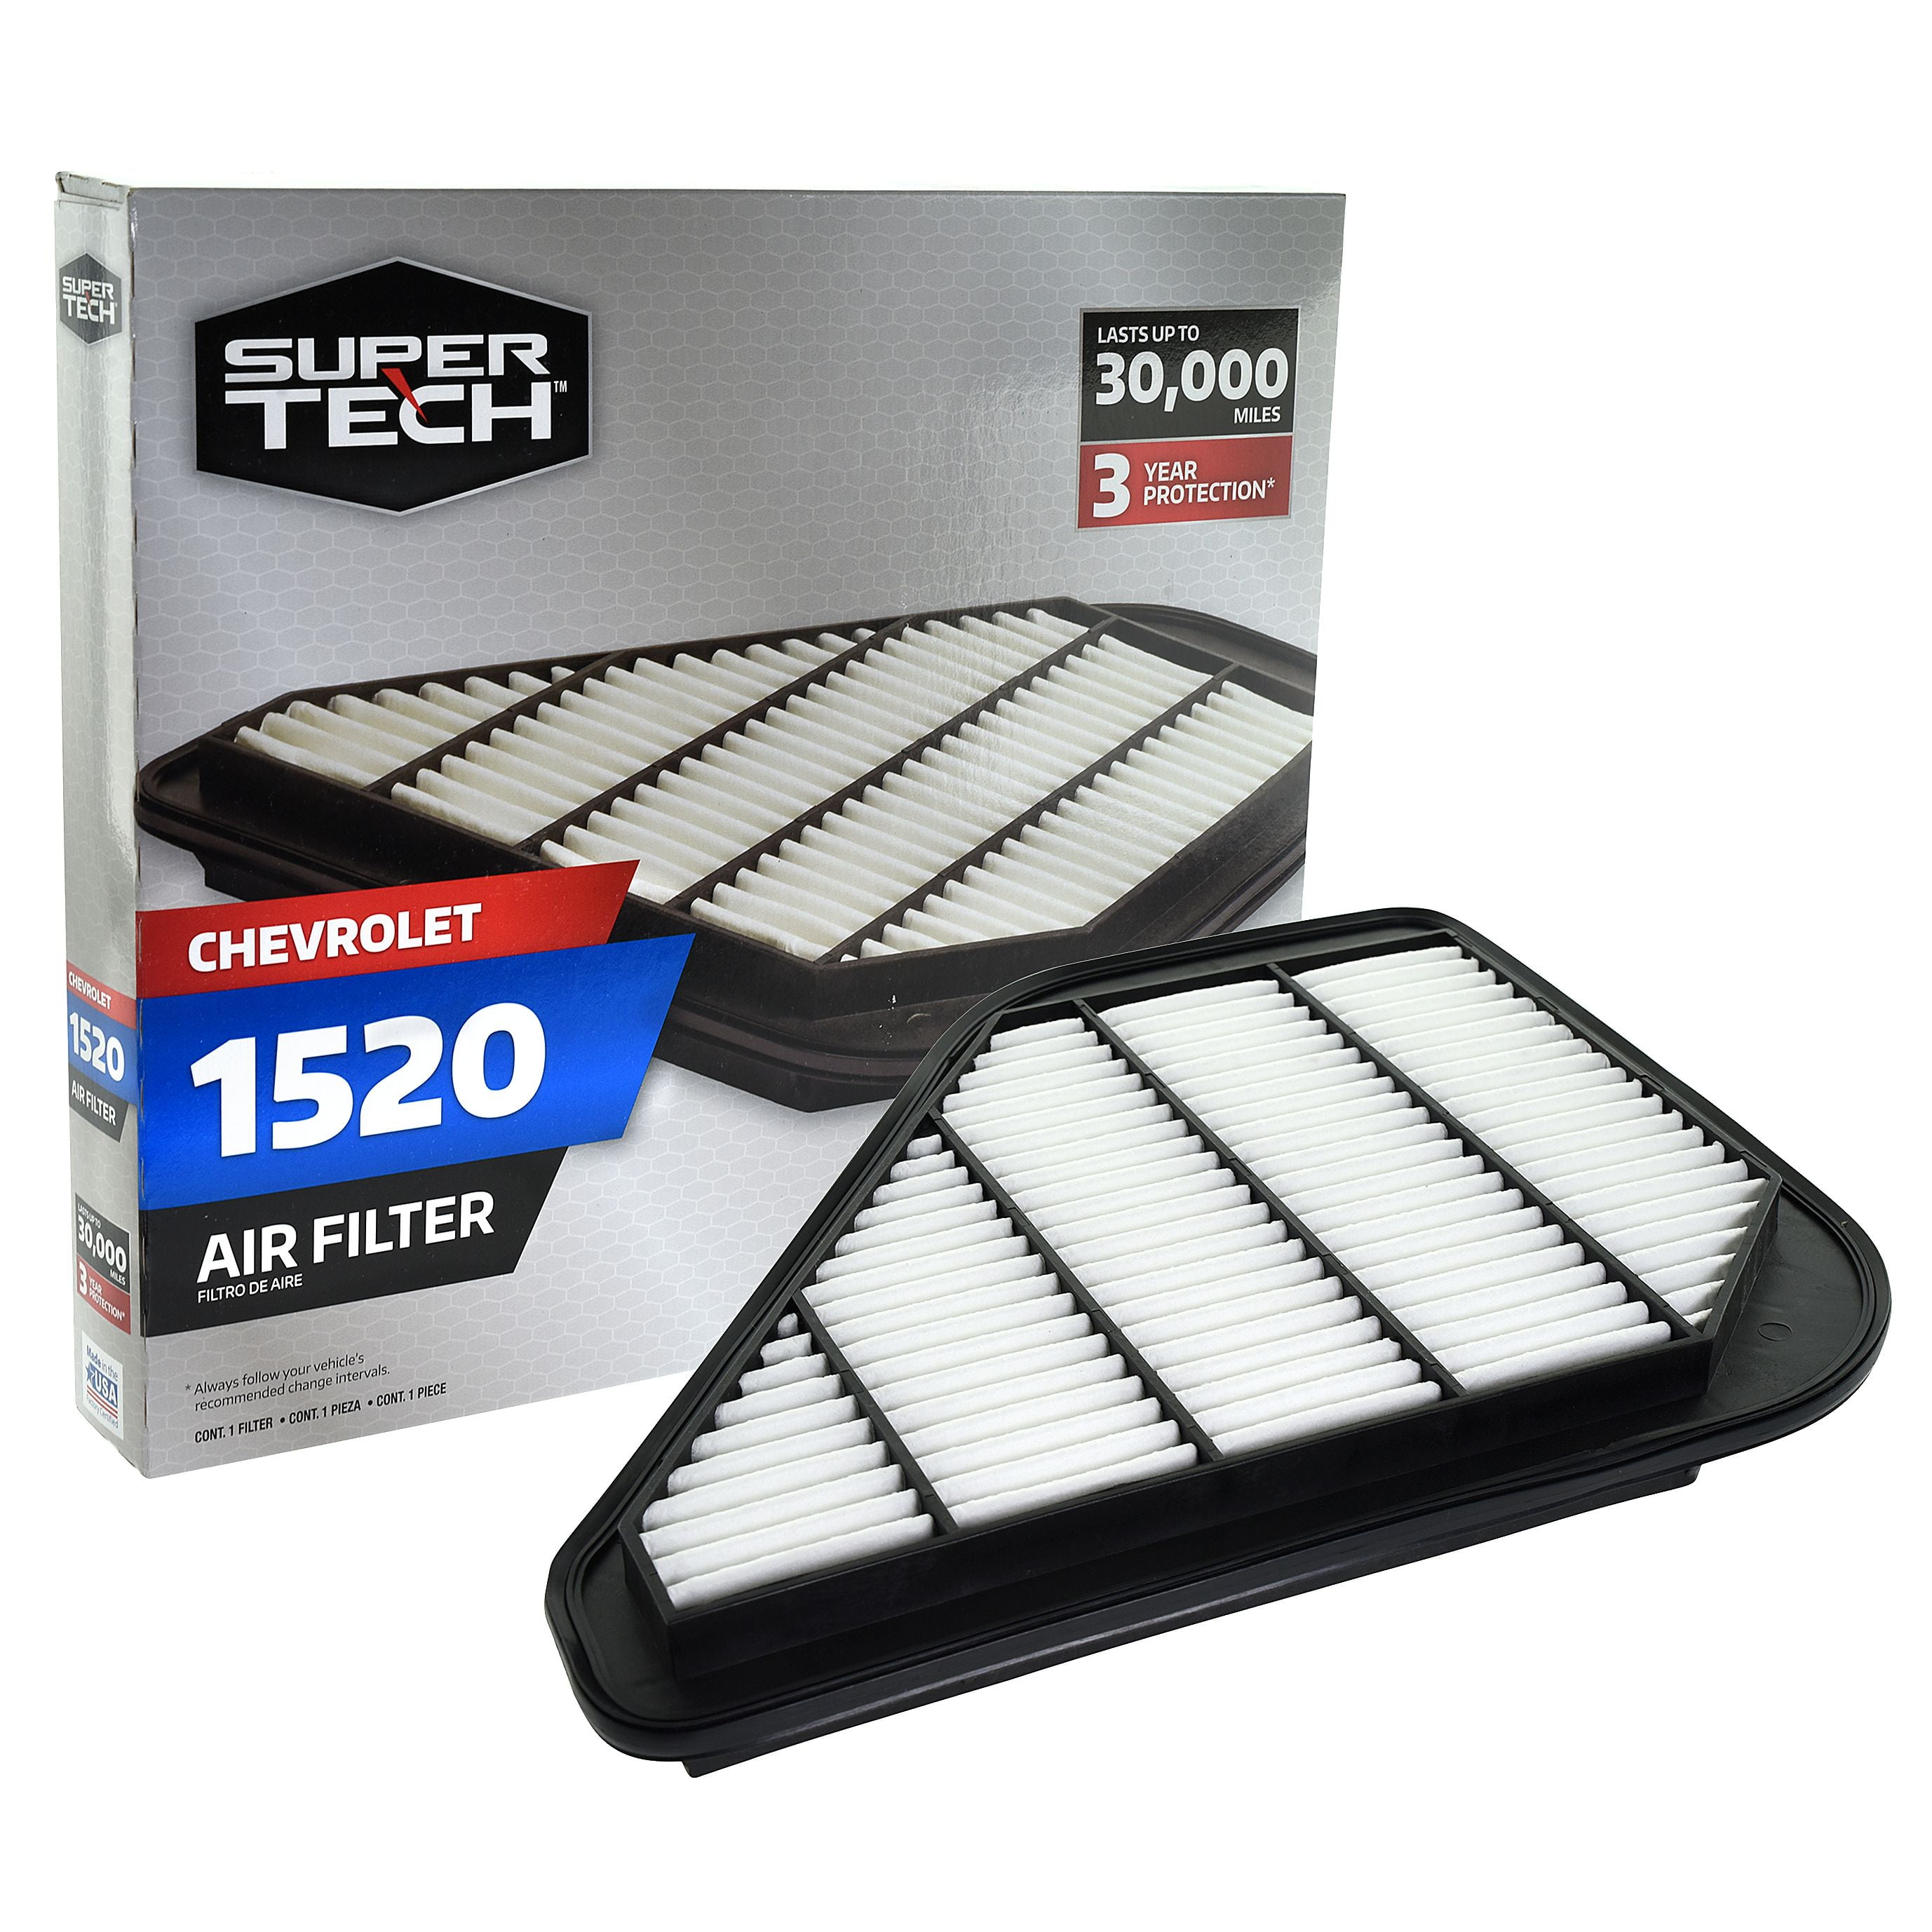 SuperTech 1520 Engine Air Filter, Replacement for GM and Chevrolet